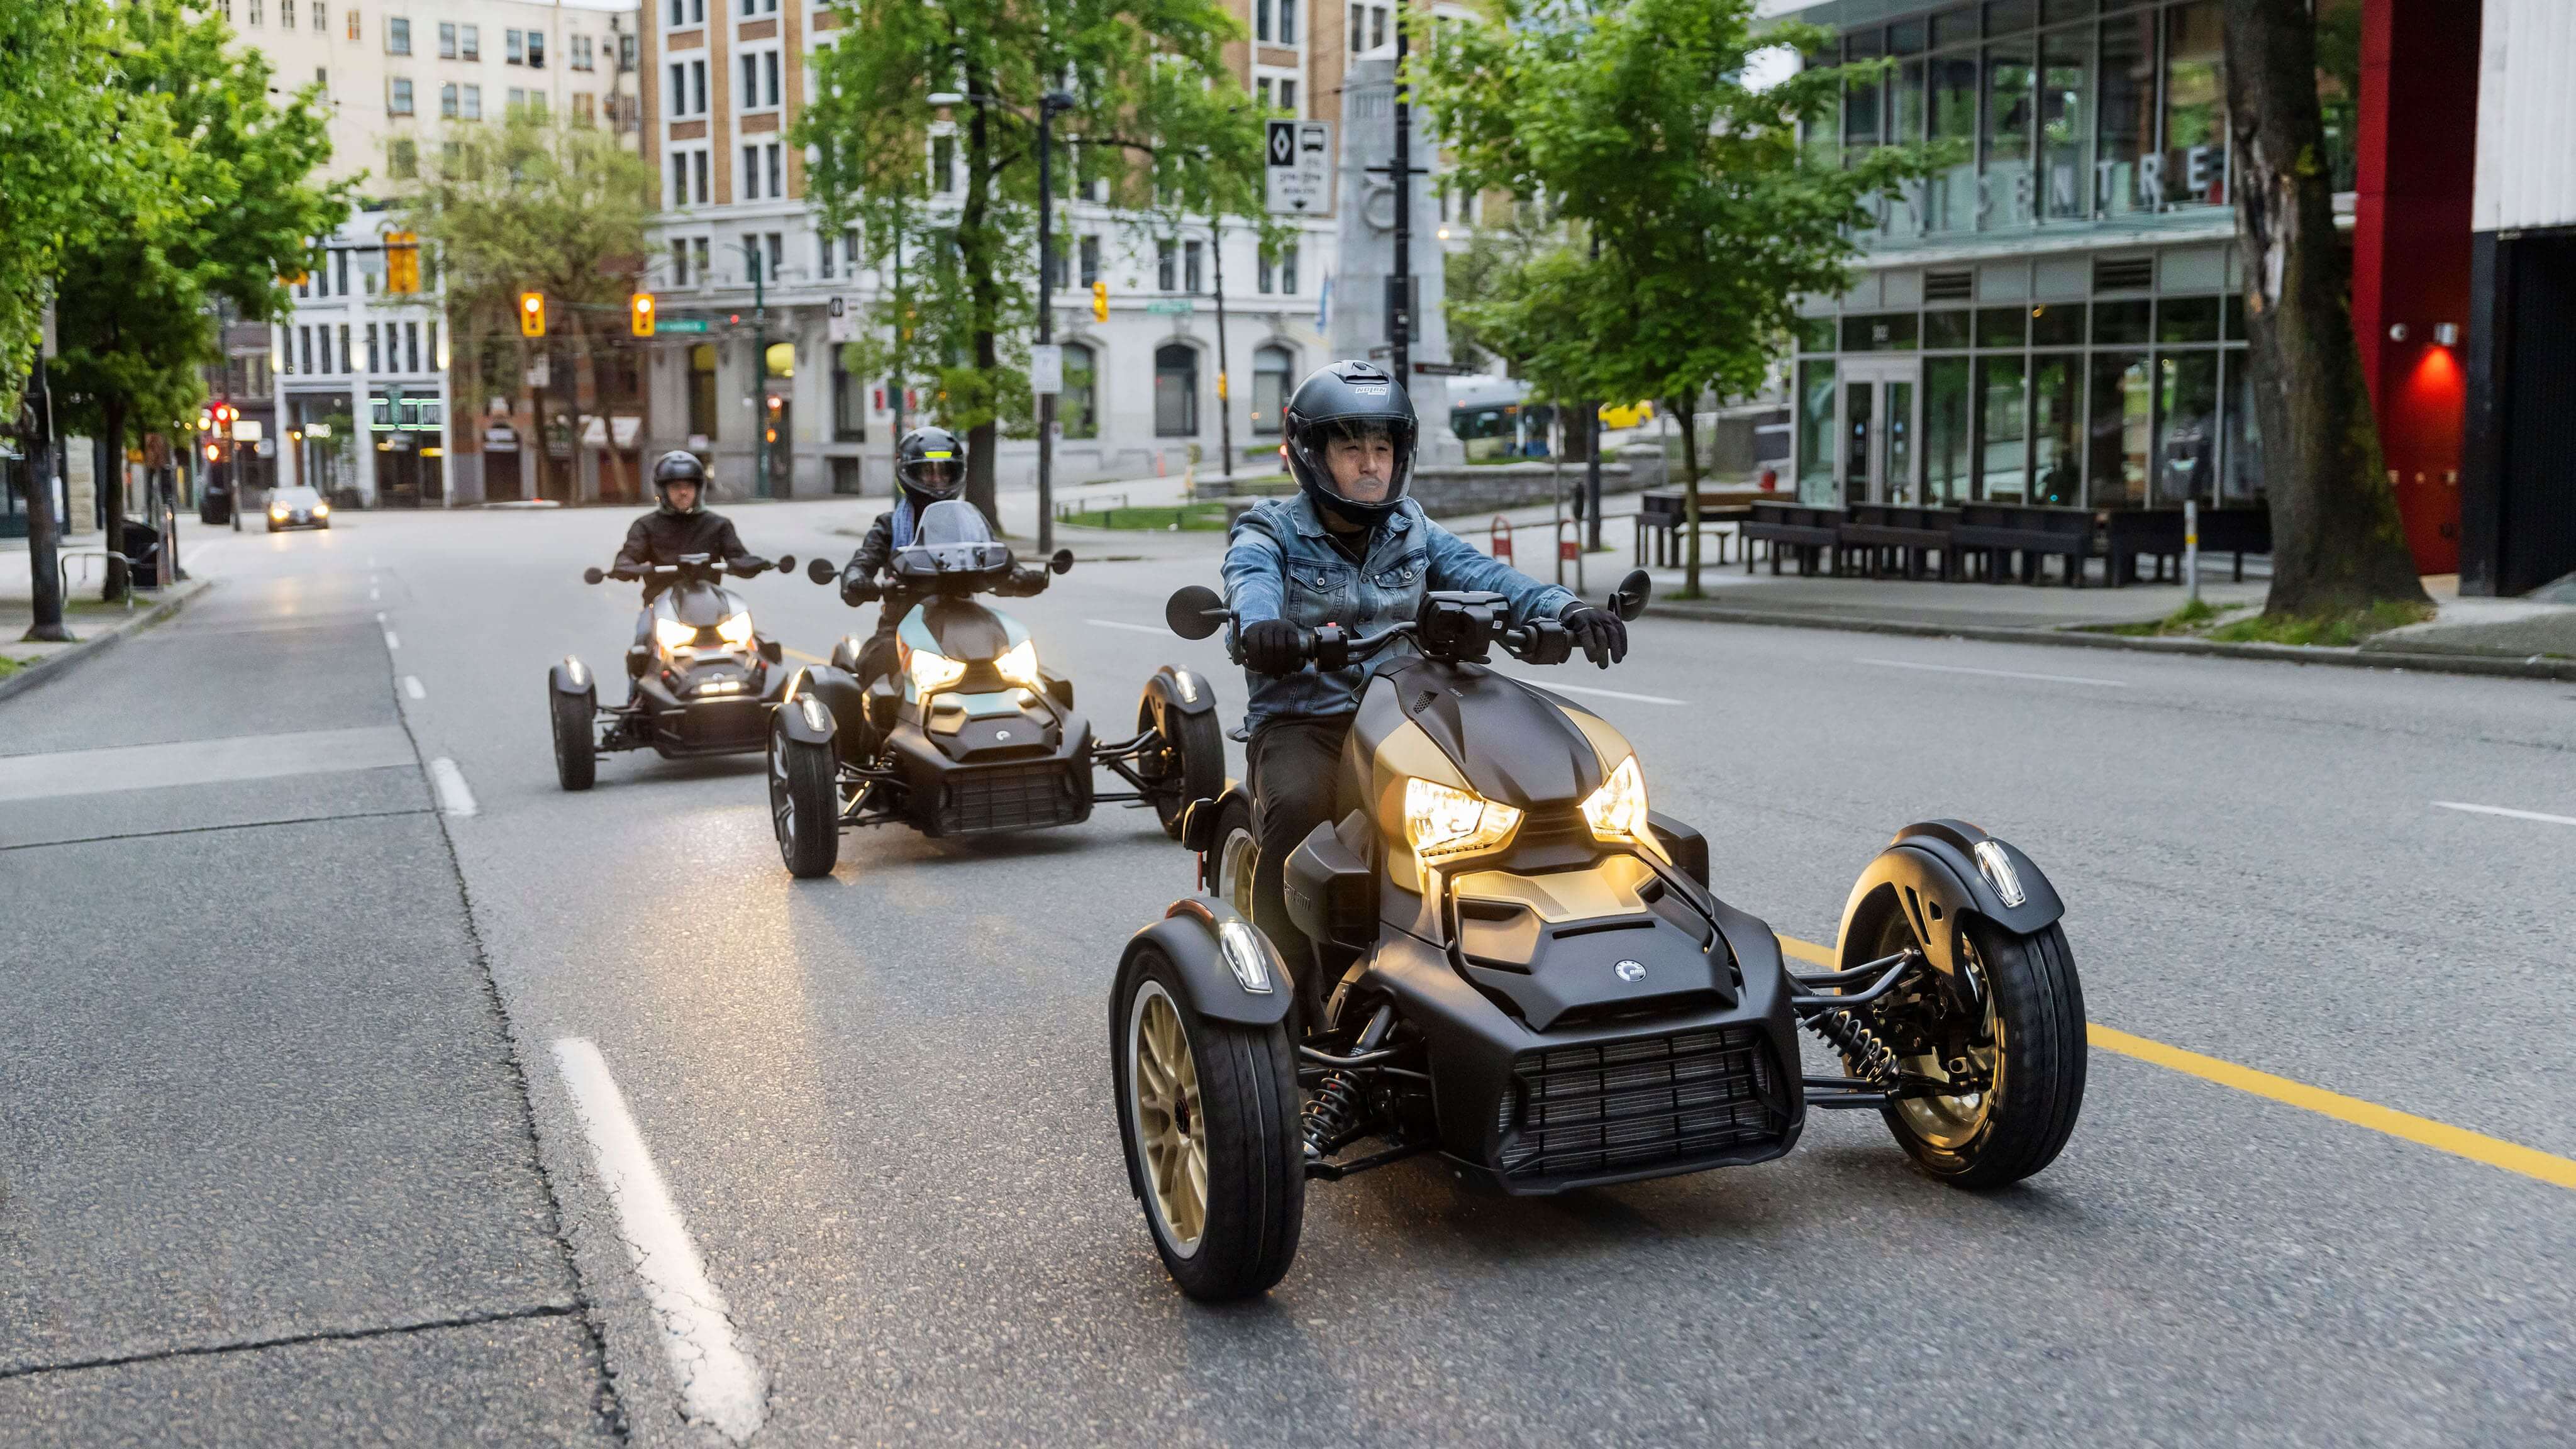 Three people wearing Can-Am helmets and driving 2023 Can-Am 3-wheel vehicles on an open road in the moddifle of a city